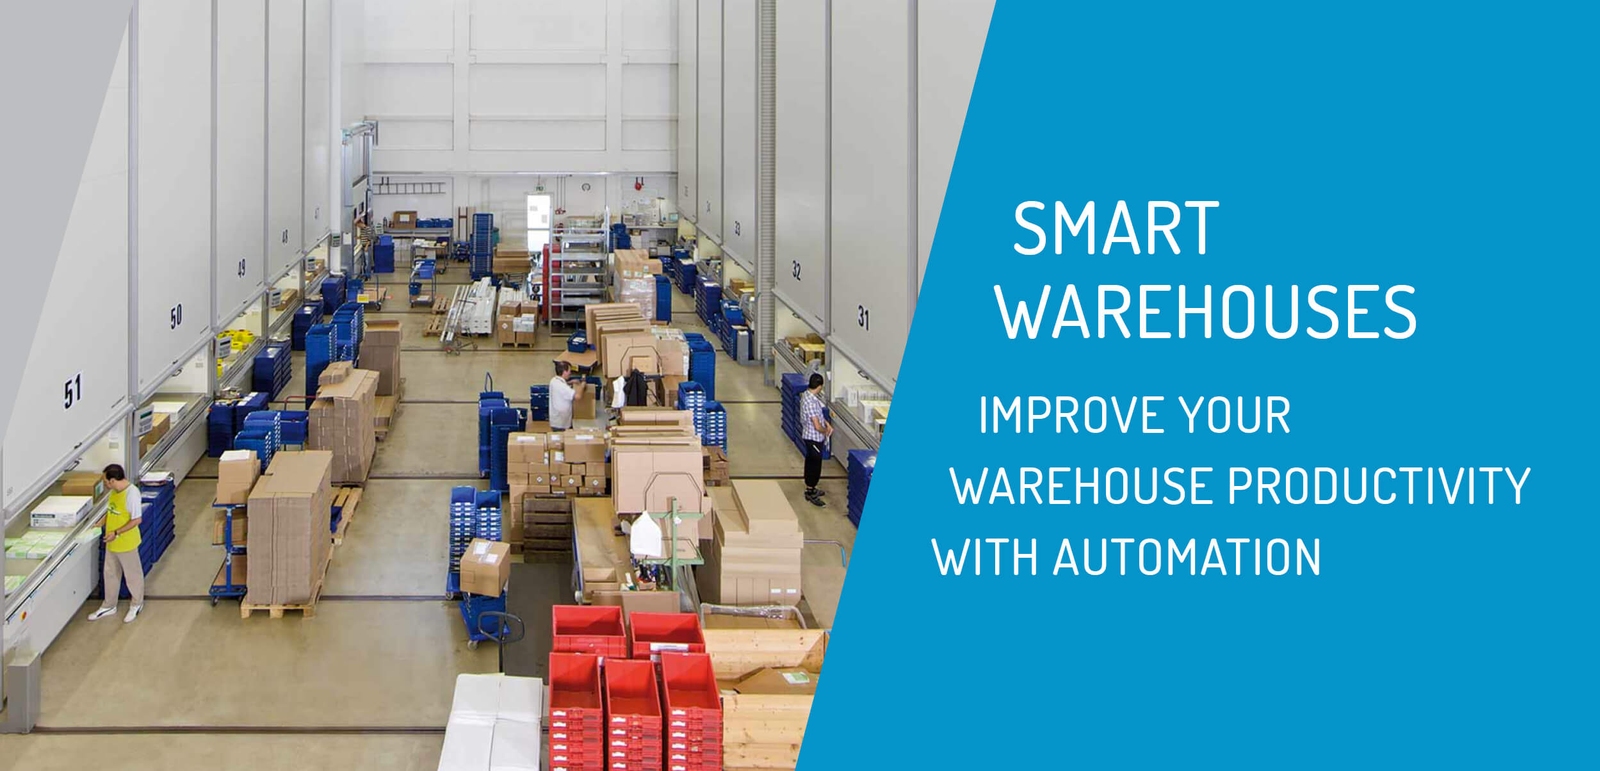 Smart Warehousing: improve your warehouse’s productivity with automation ﻿